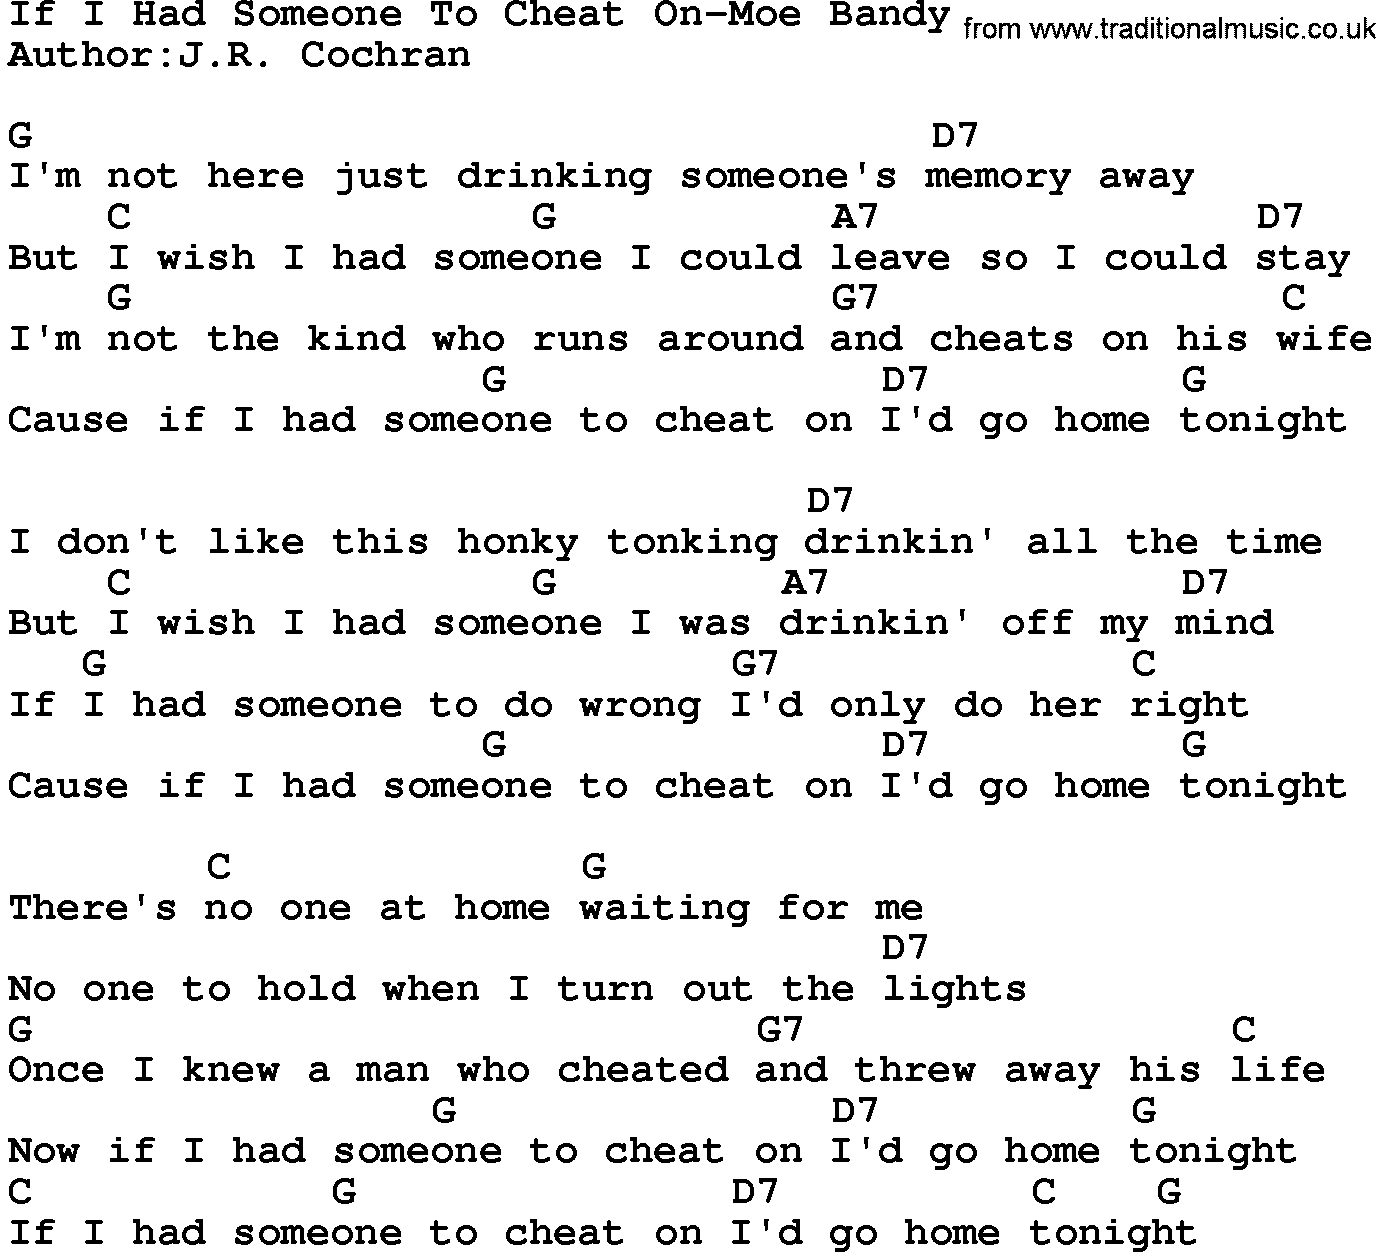 Country music song: If I Had Someone To Cheat On-Moe Bandy lyrics and chords